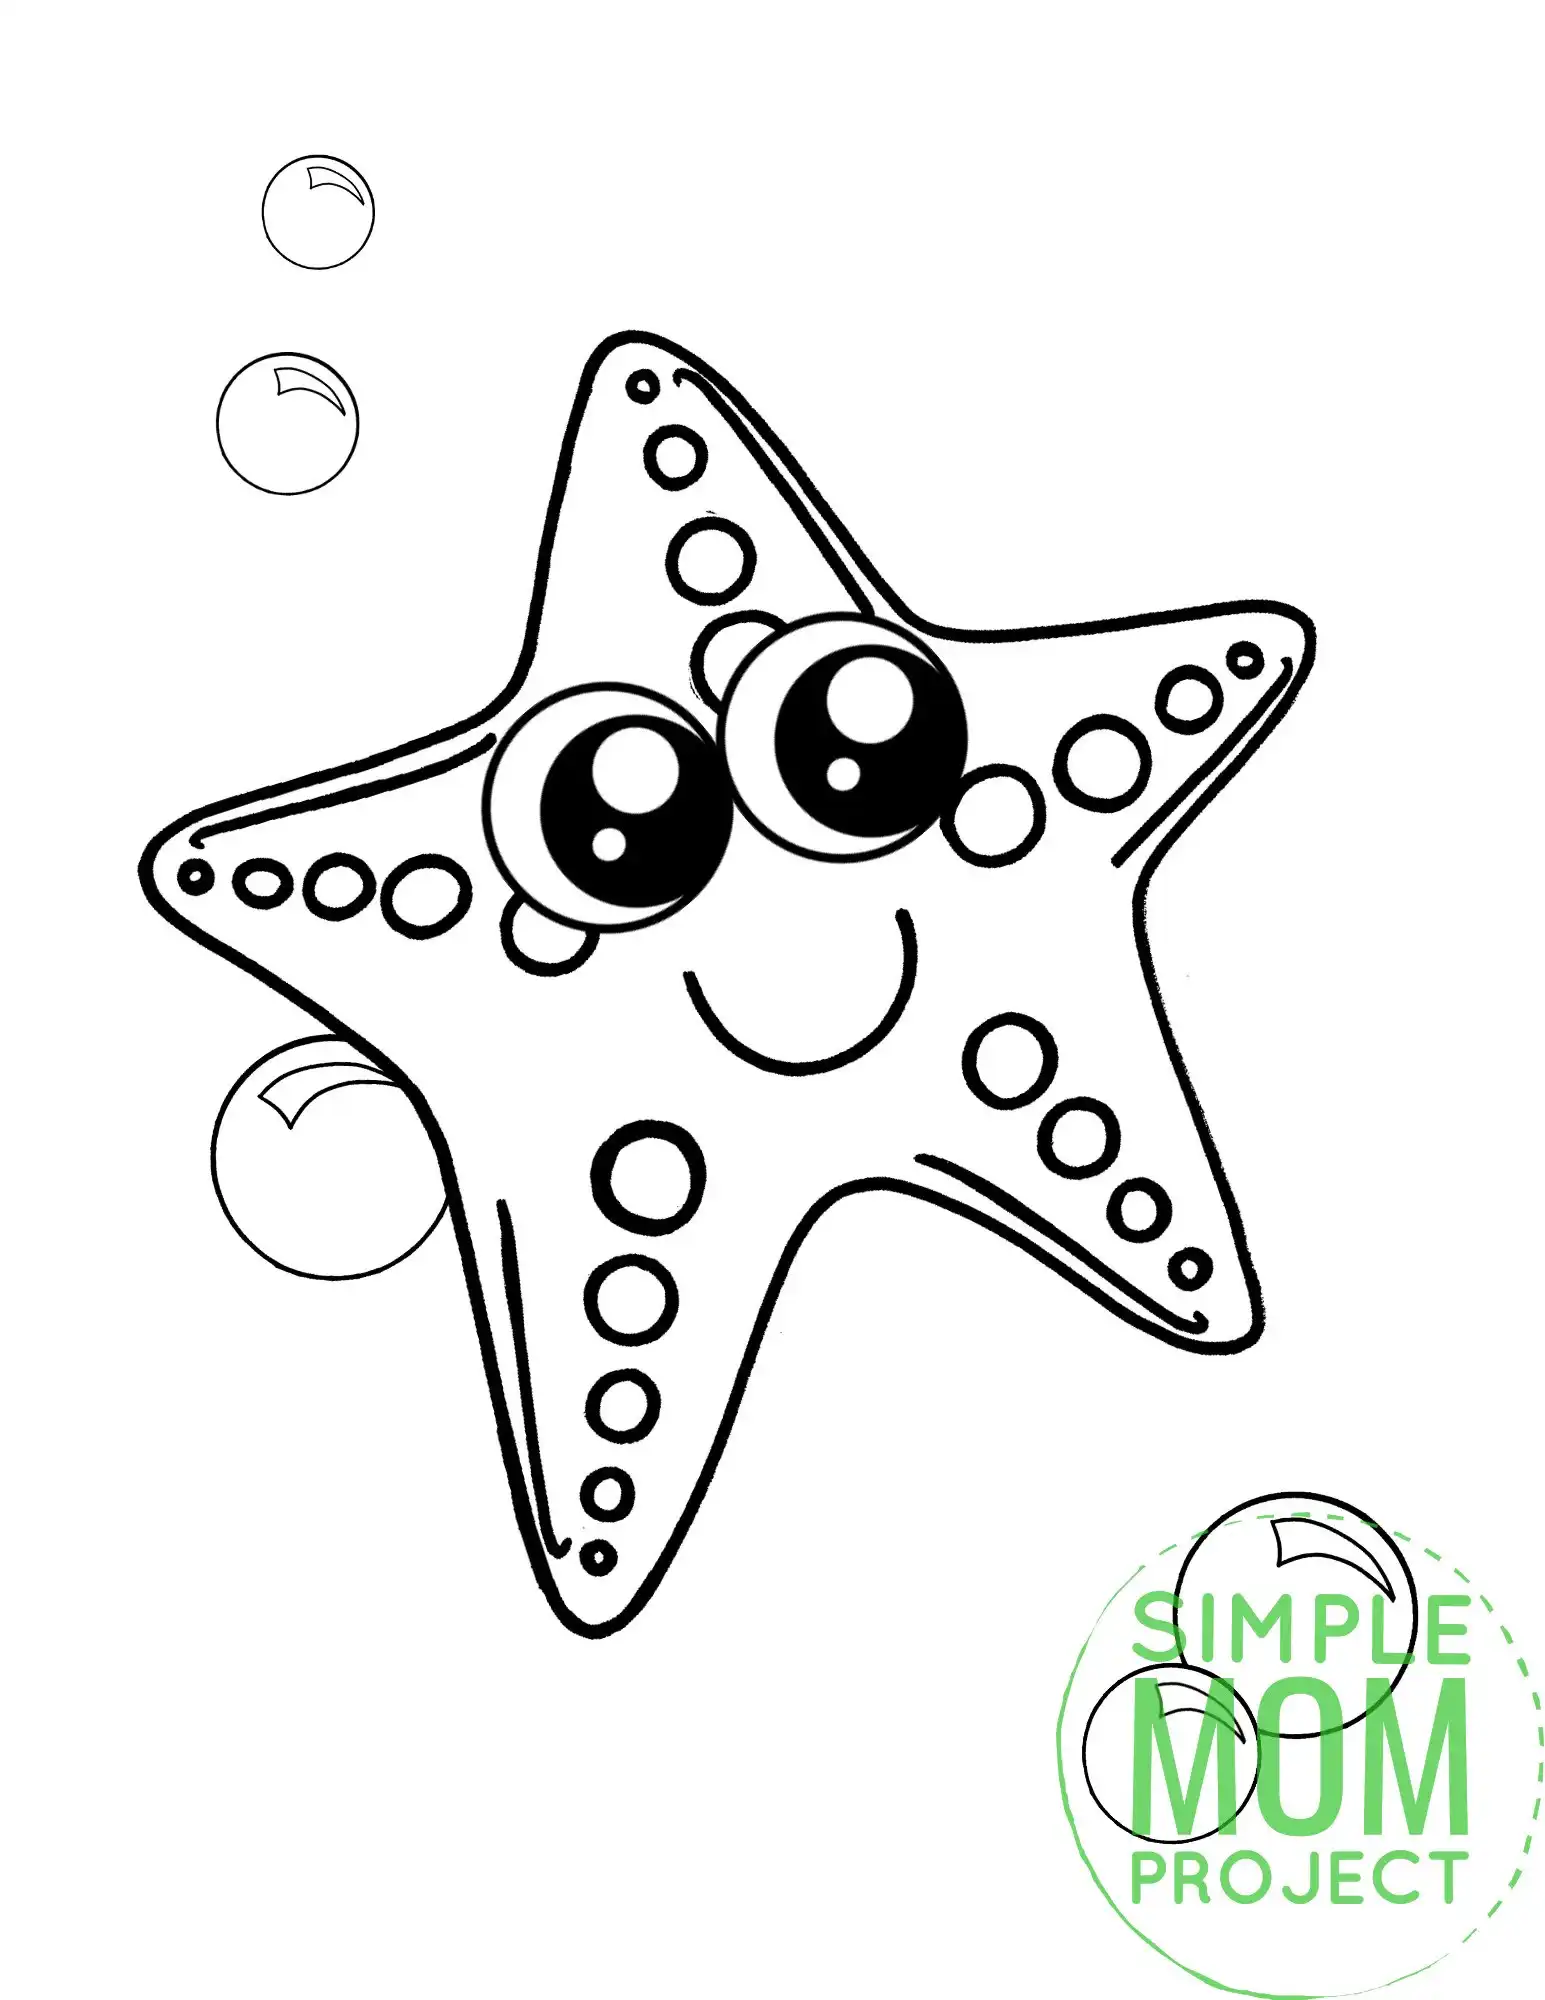 Free printable starfish coloring page â simple mom project